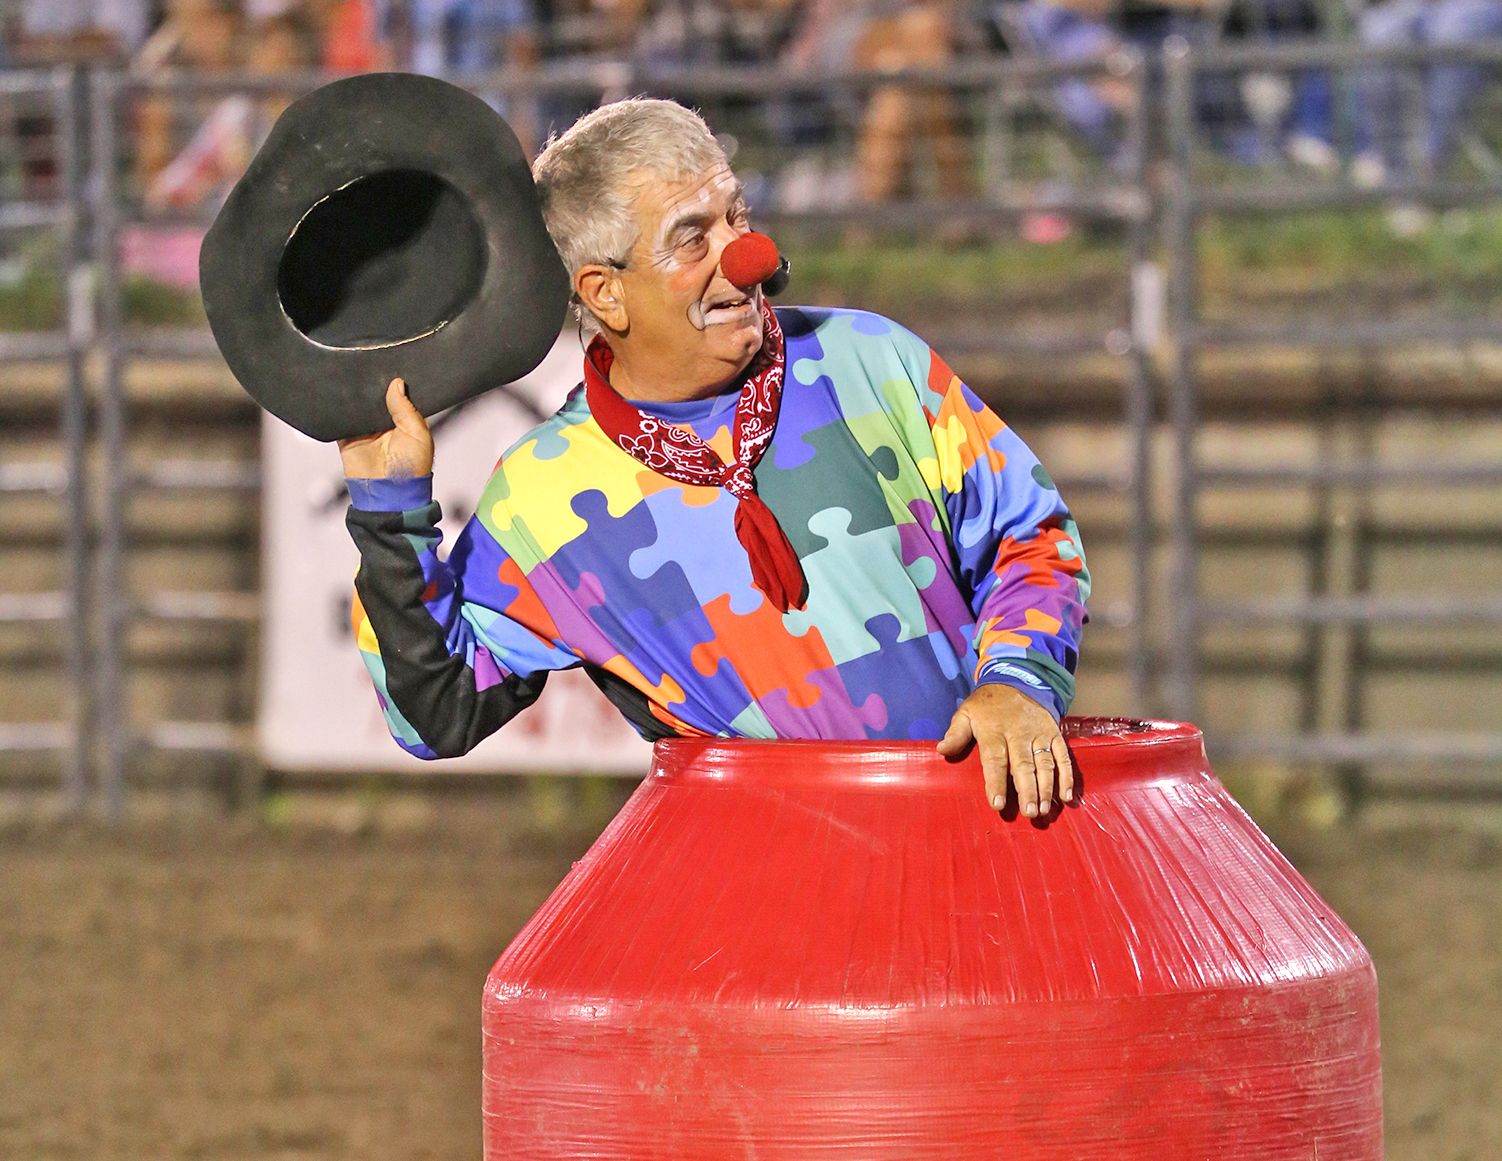 Rodeo clown is never far from mud and blood